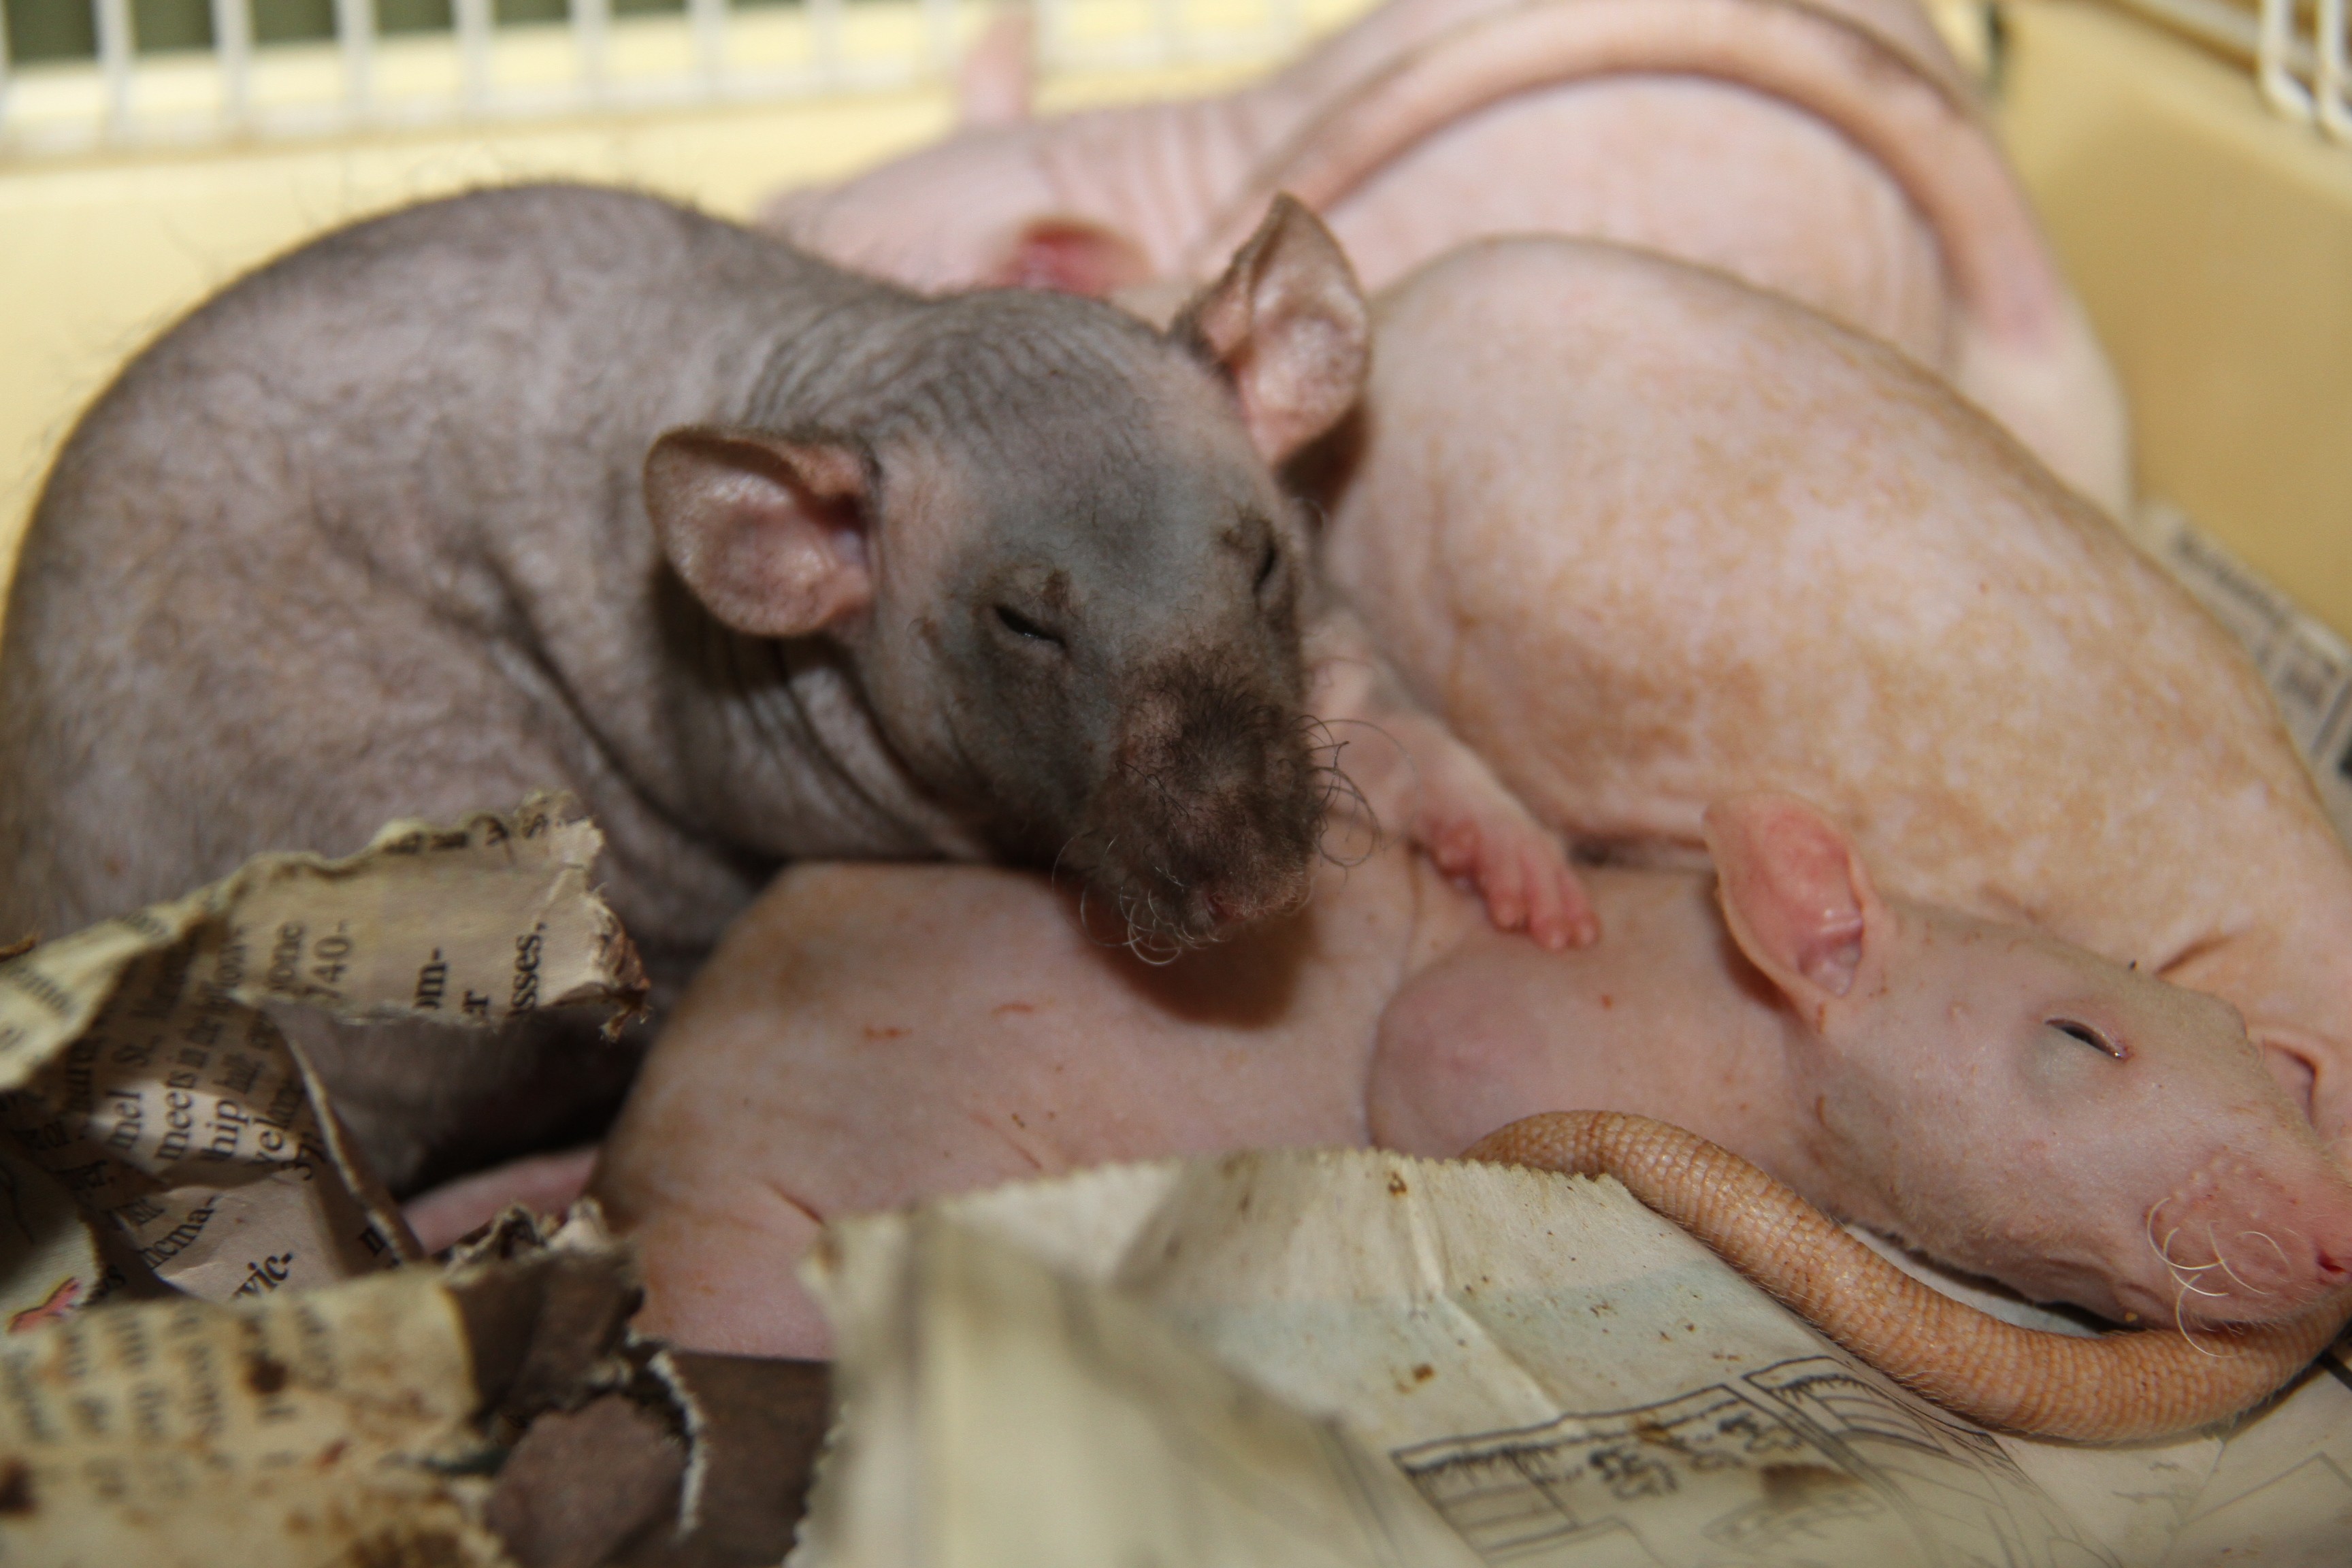 dumbo rex rats for sale near me